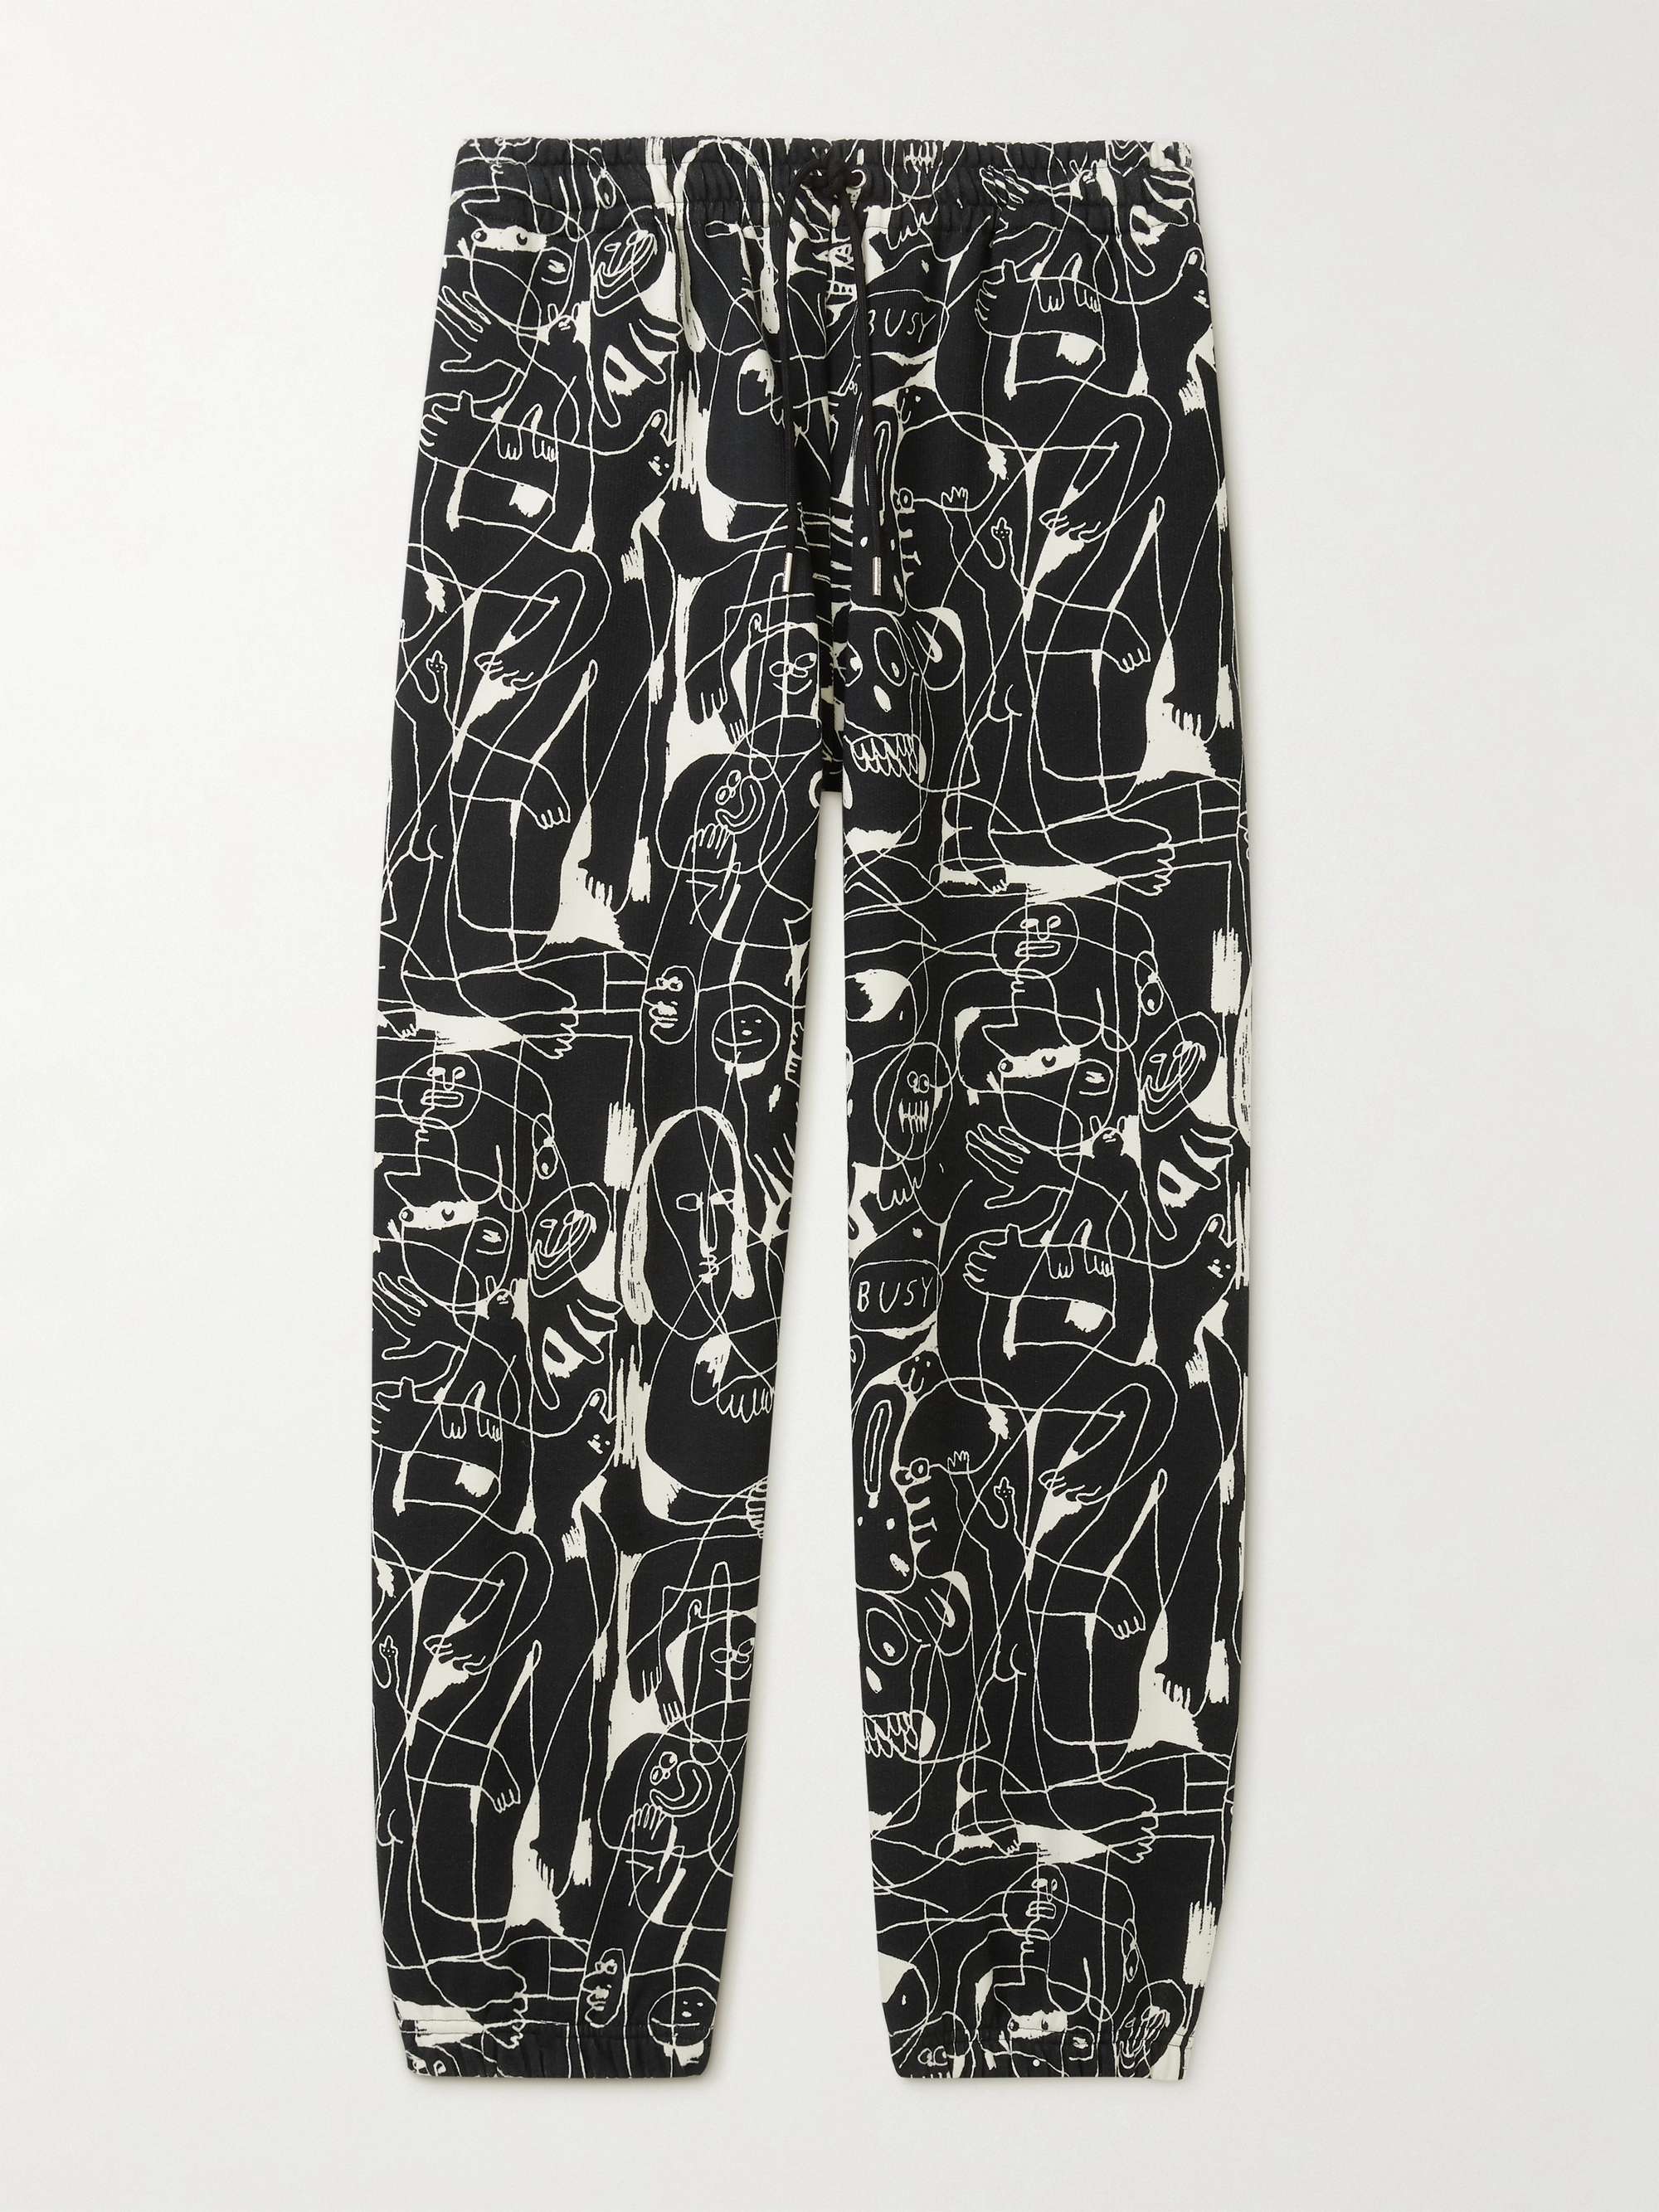 CELINE HOMME Tapered Printed Cotton-Jersey Sweatpants